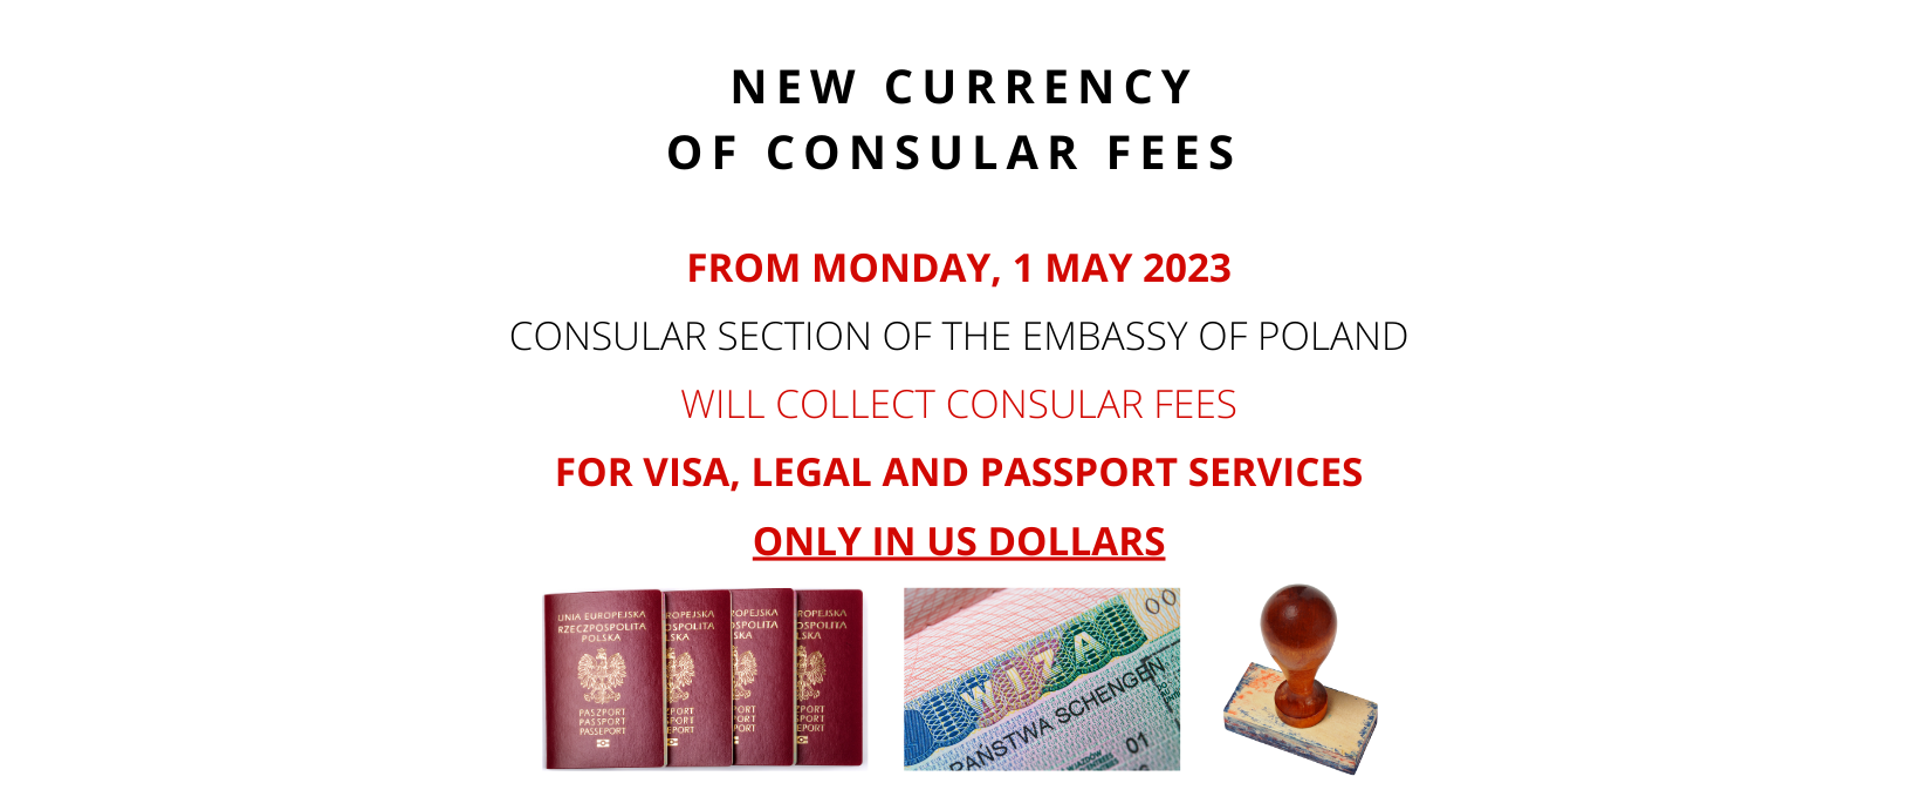 New currency of consular fees